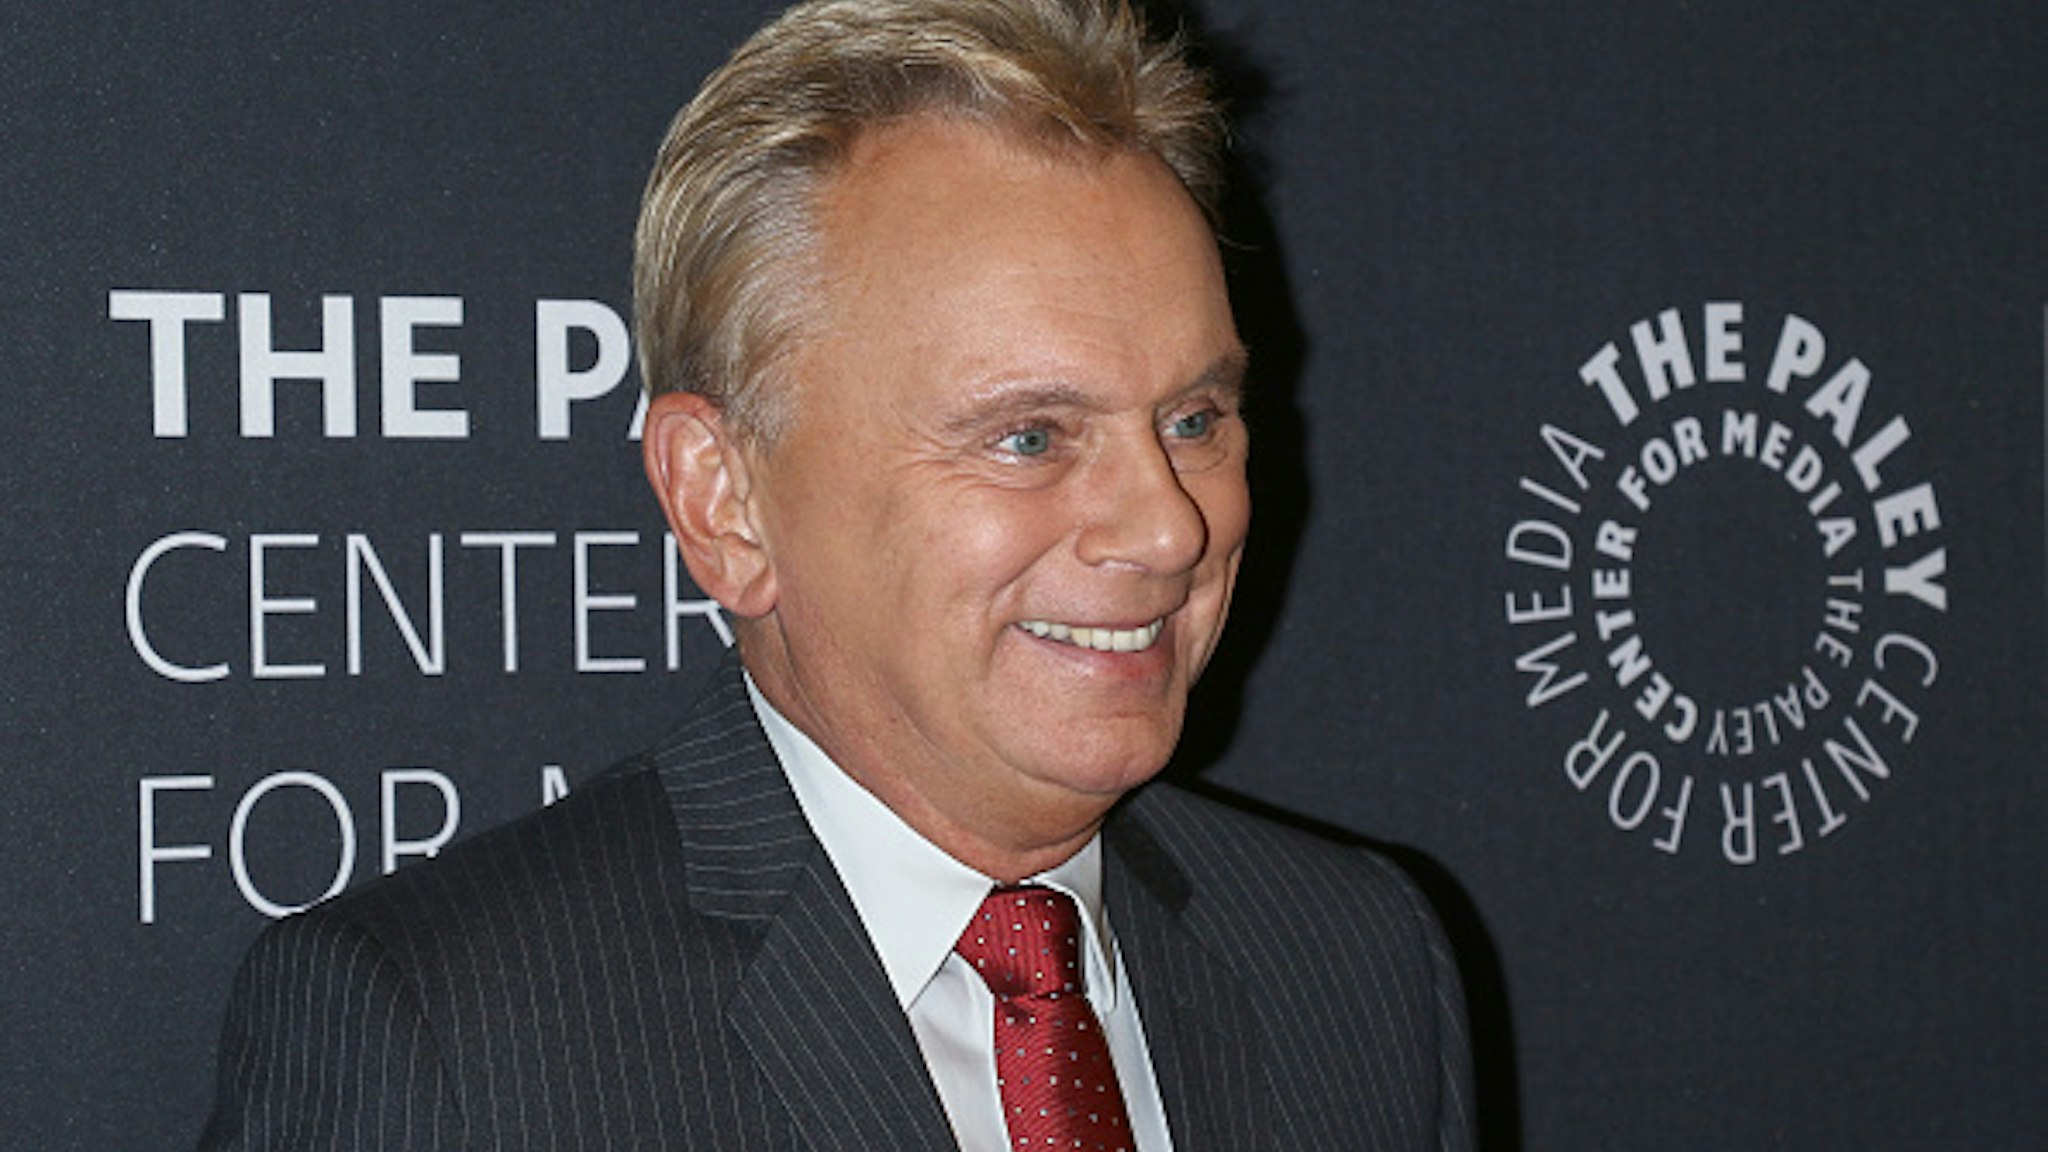 NEW YORK, NY - NOVEMBER 15: TV personality Pat Sajak attends The Wheel of Fortune: 35 Years as America's Game hosted by The Paley Center For Media at The Paley Center for Media on November 15, 2017 in New York City.